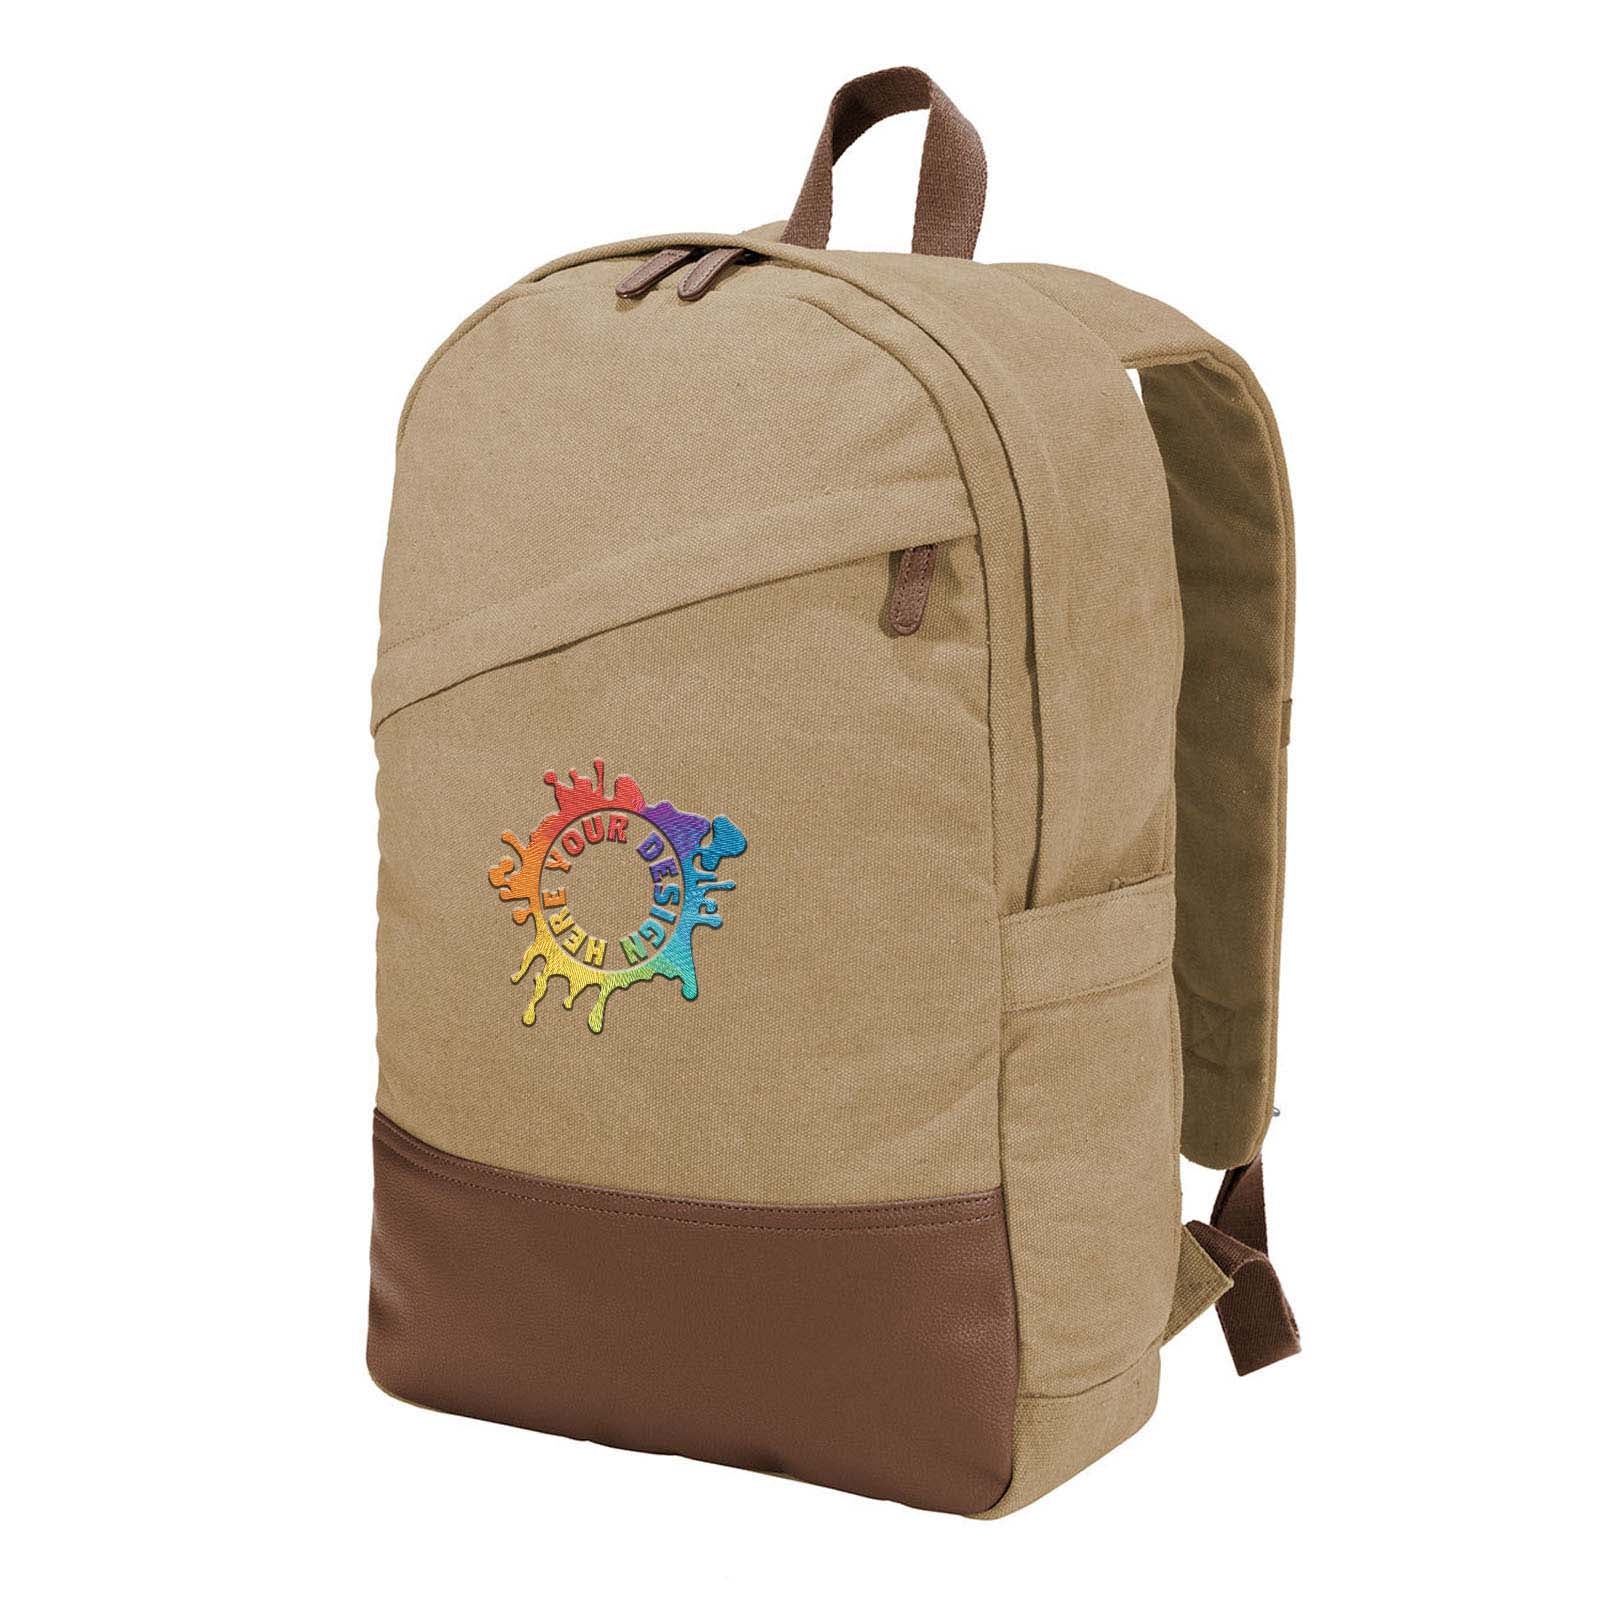 Port Authority ® Cotton Canvas Backpack Embroidery - Mato & Hash